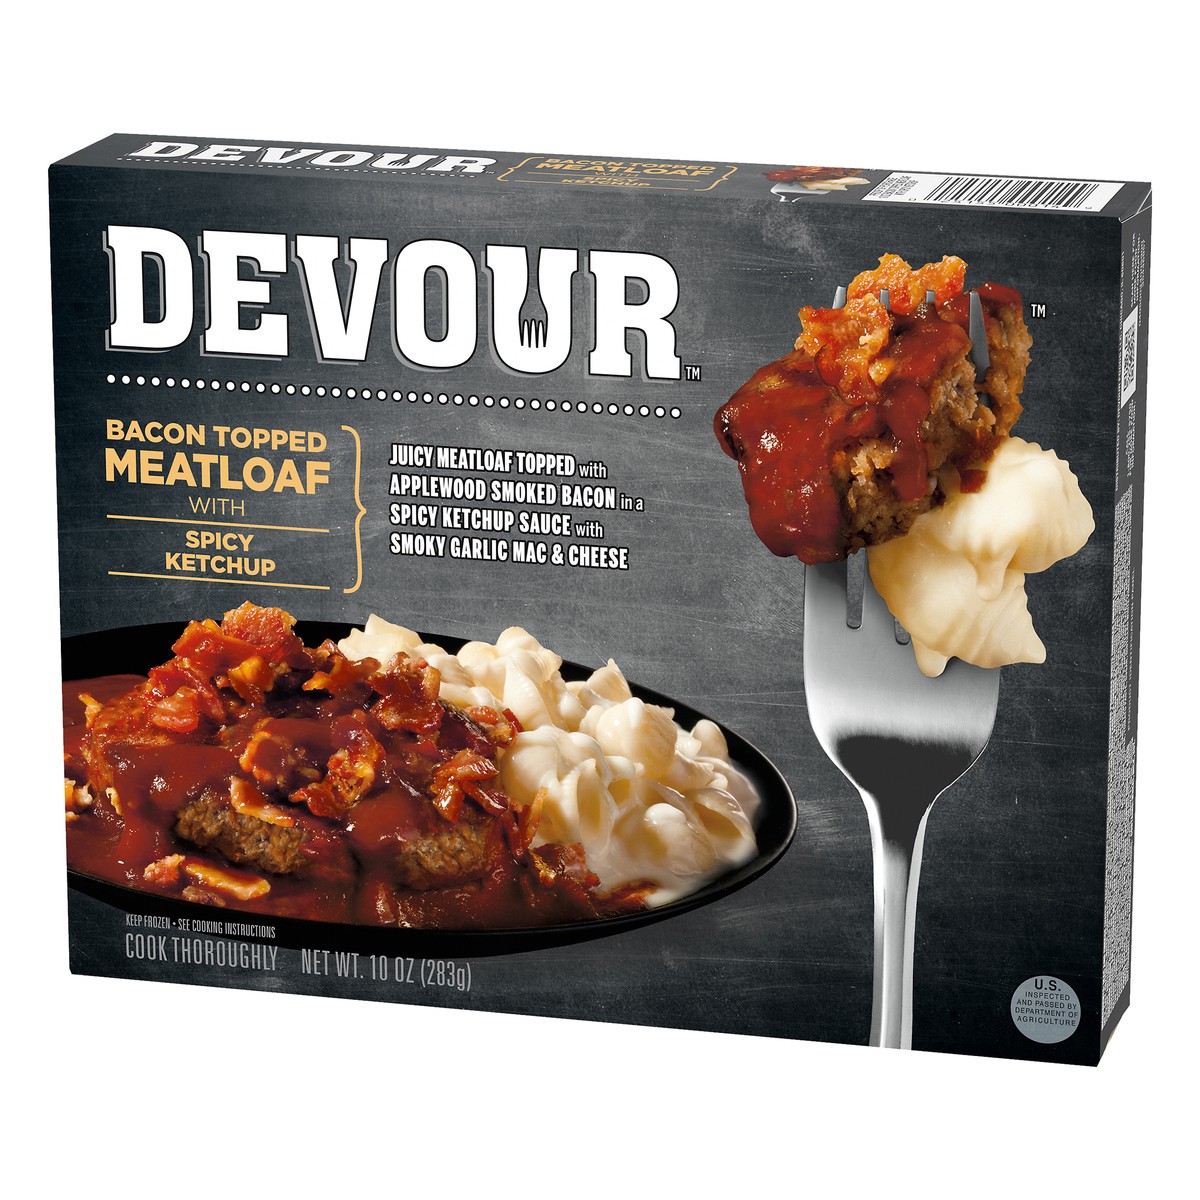 slide 11 of 11, DEVOUR Bacon Topped Meatloaf with Spicy Ketchup 10 oz. Box, 10 oz